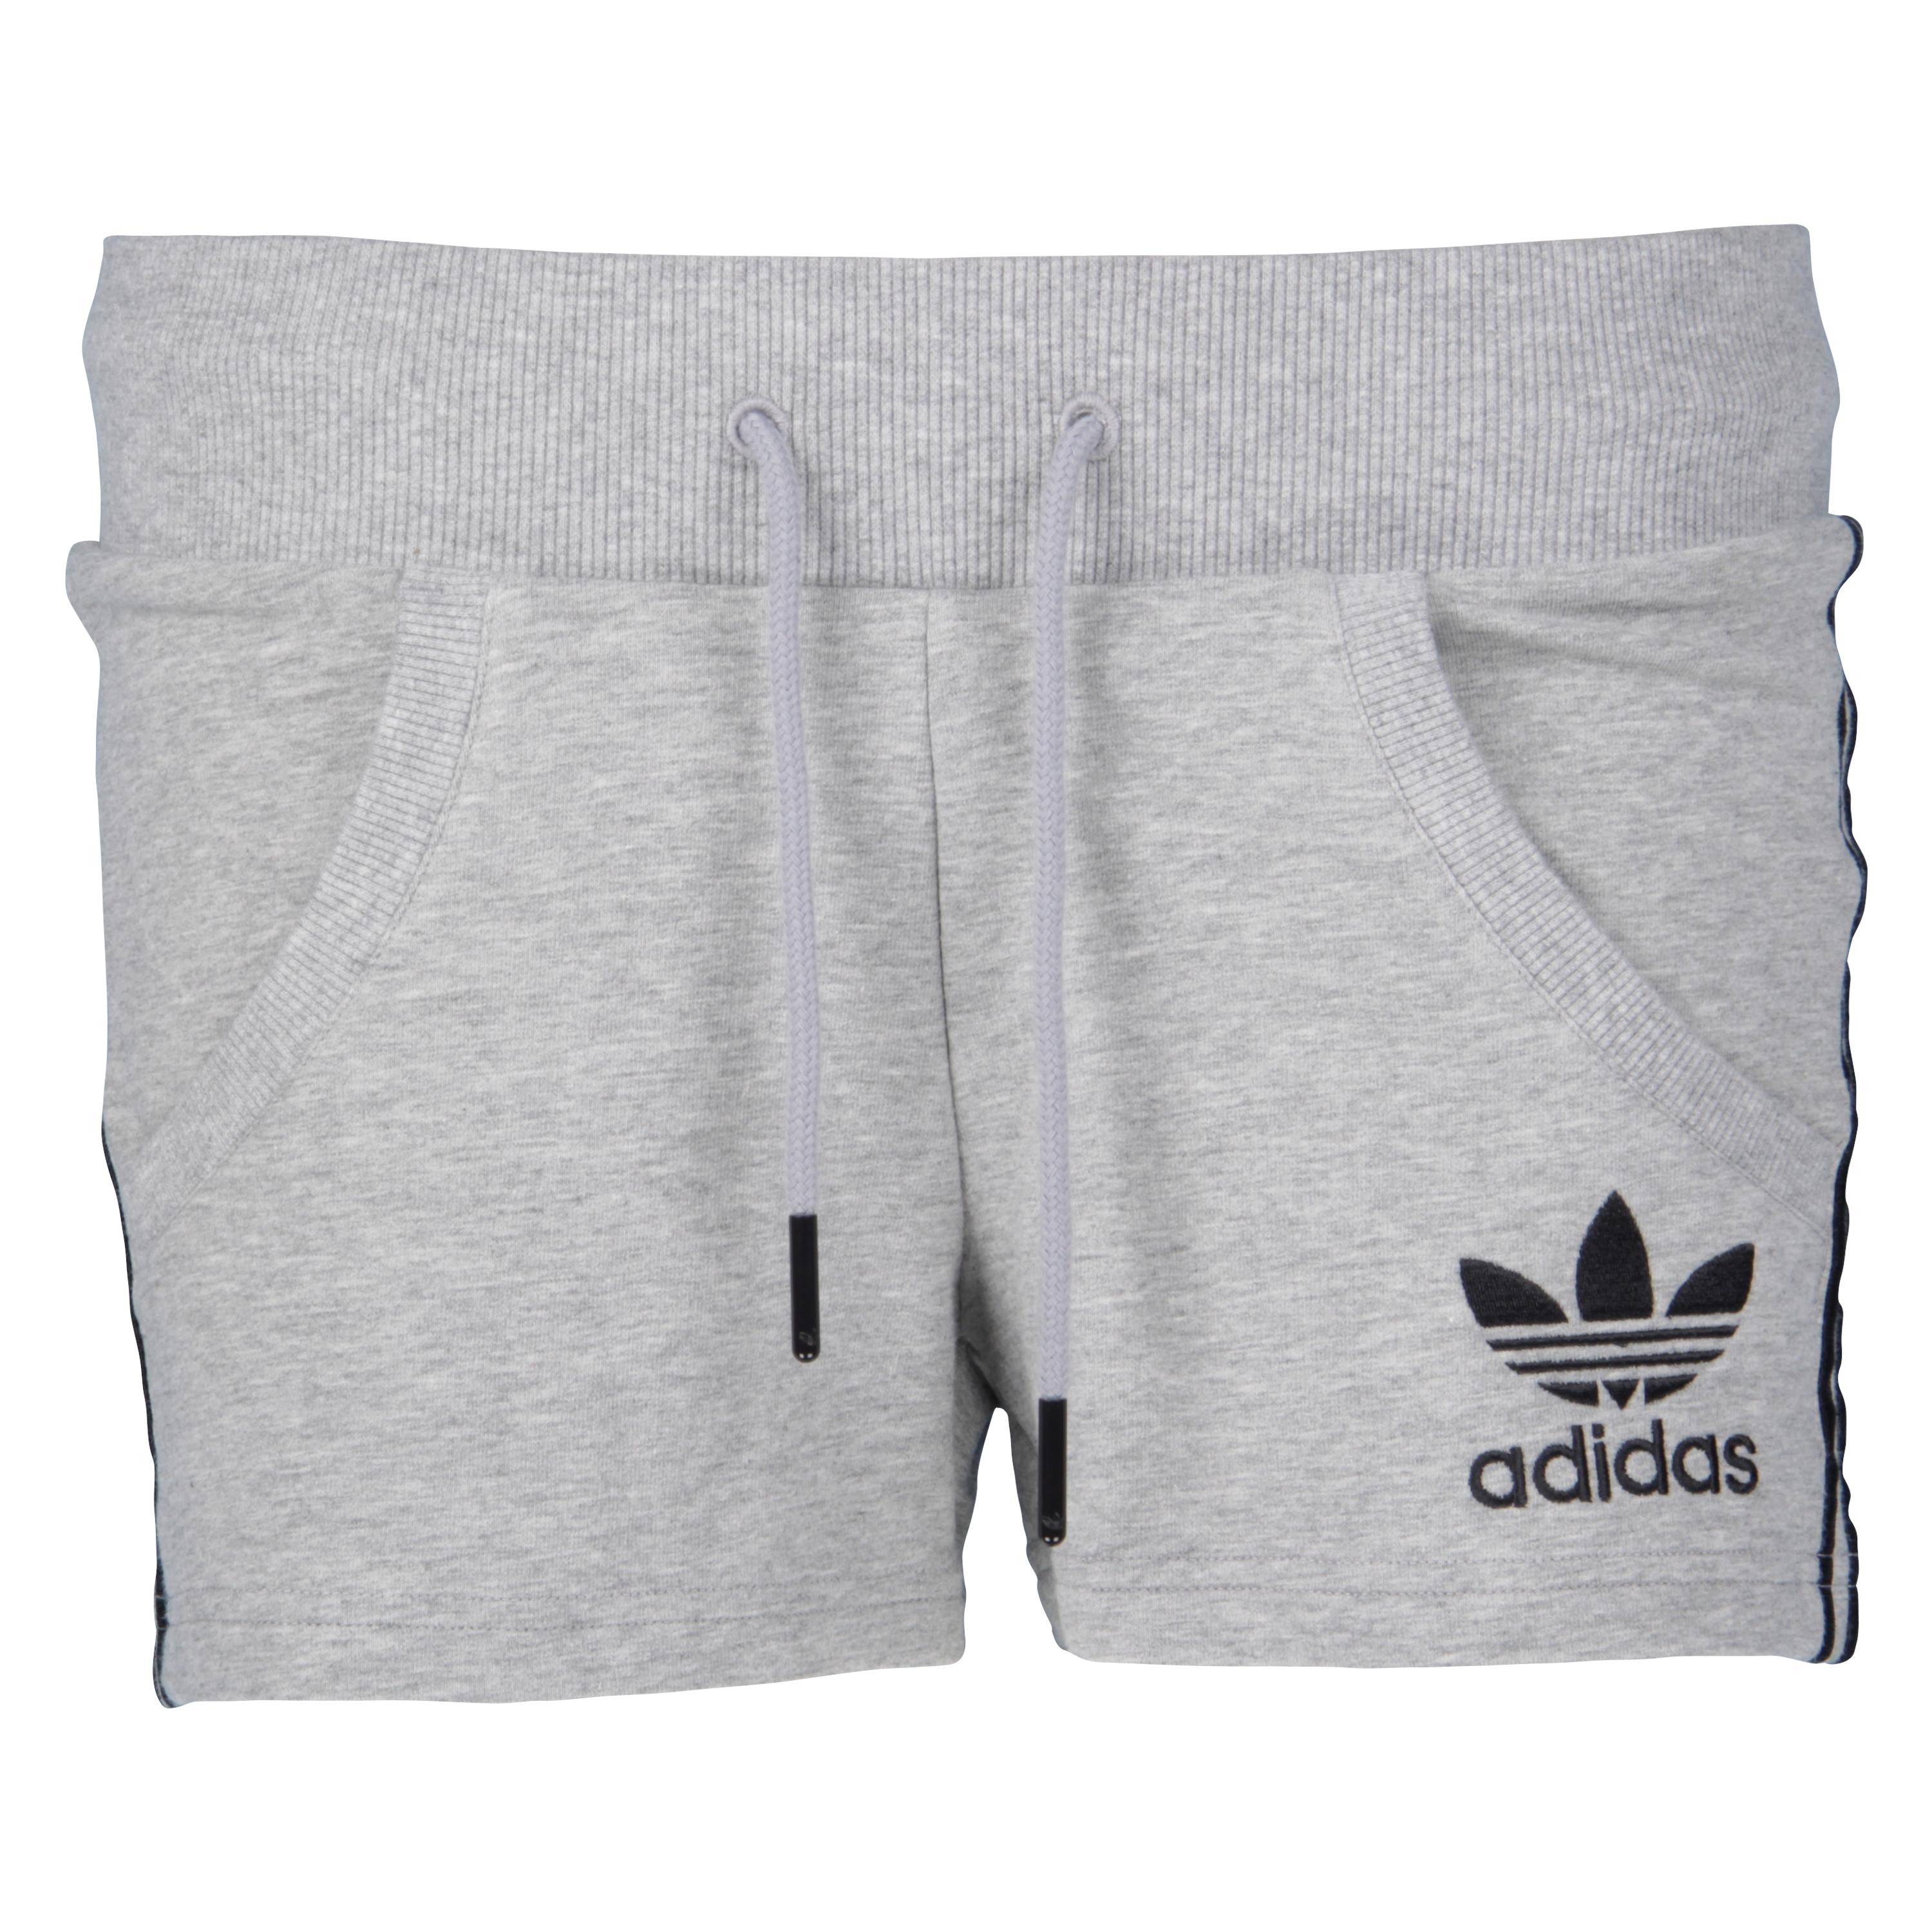 Foto adidas Chile French Terry Short Exclusiva @ Foot Locker foto 693493